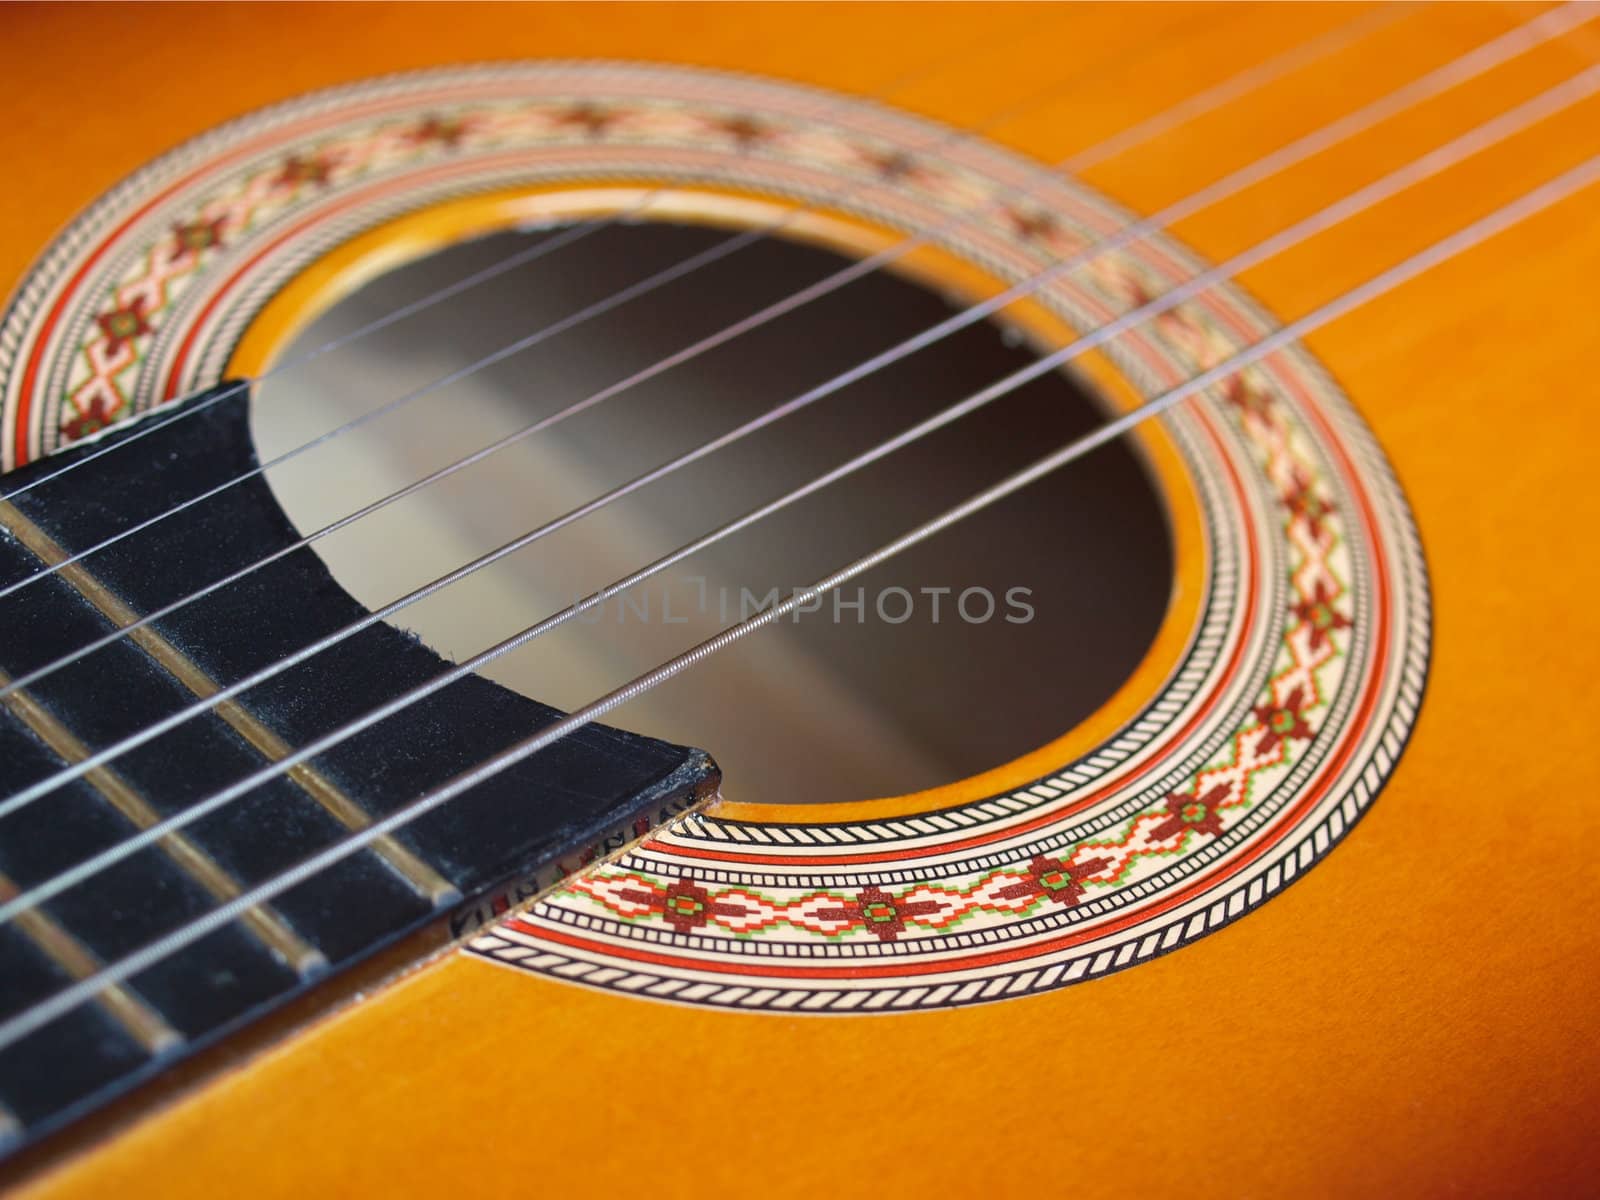 Guitar by paolo77